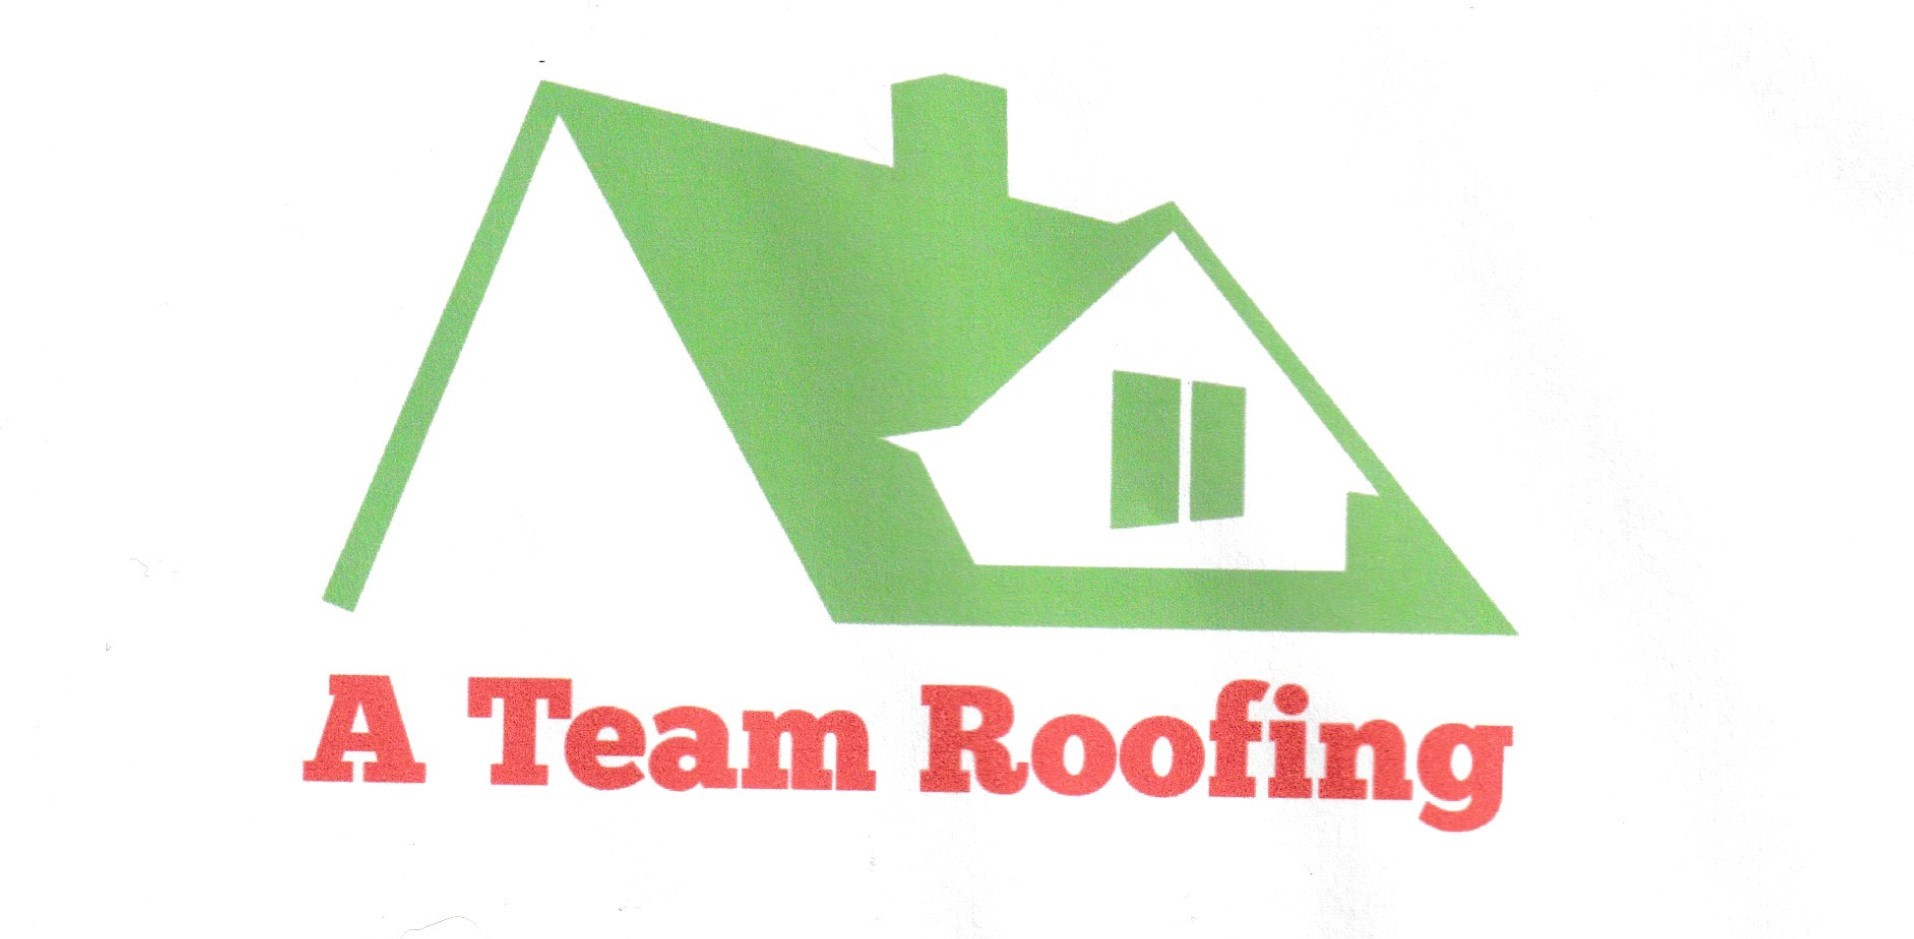 A Team Roofing